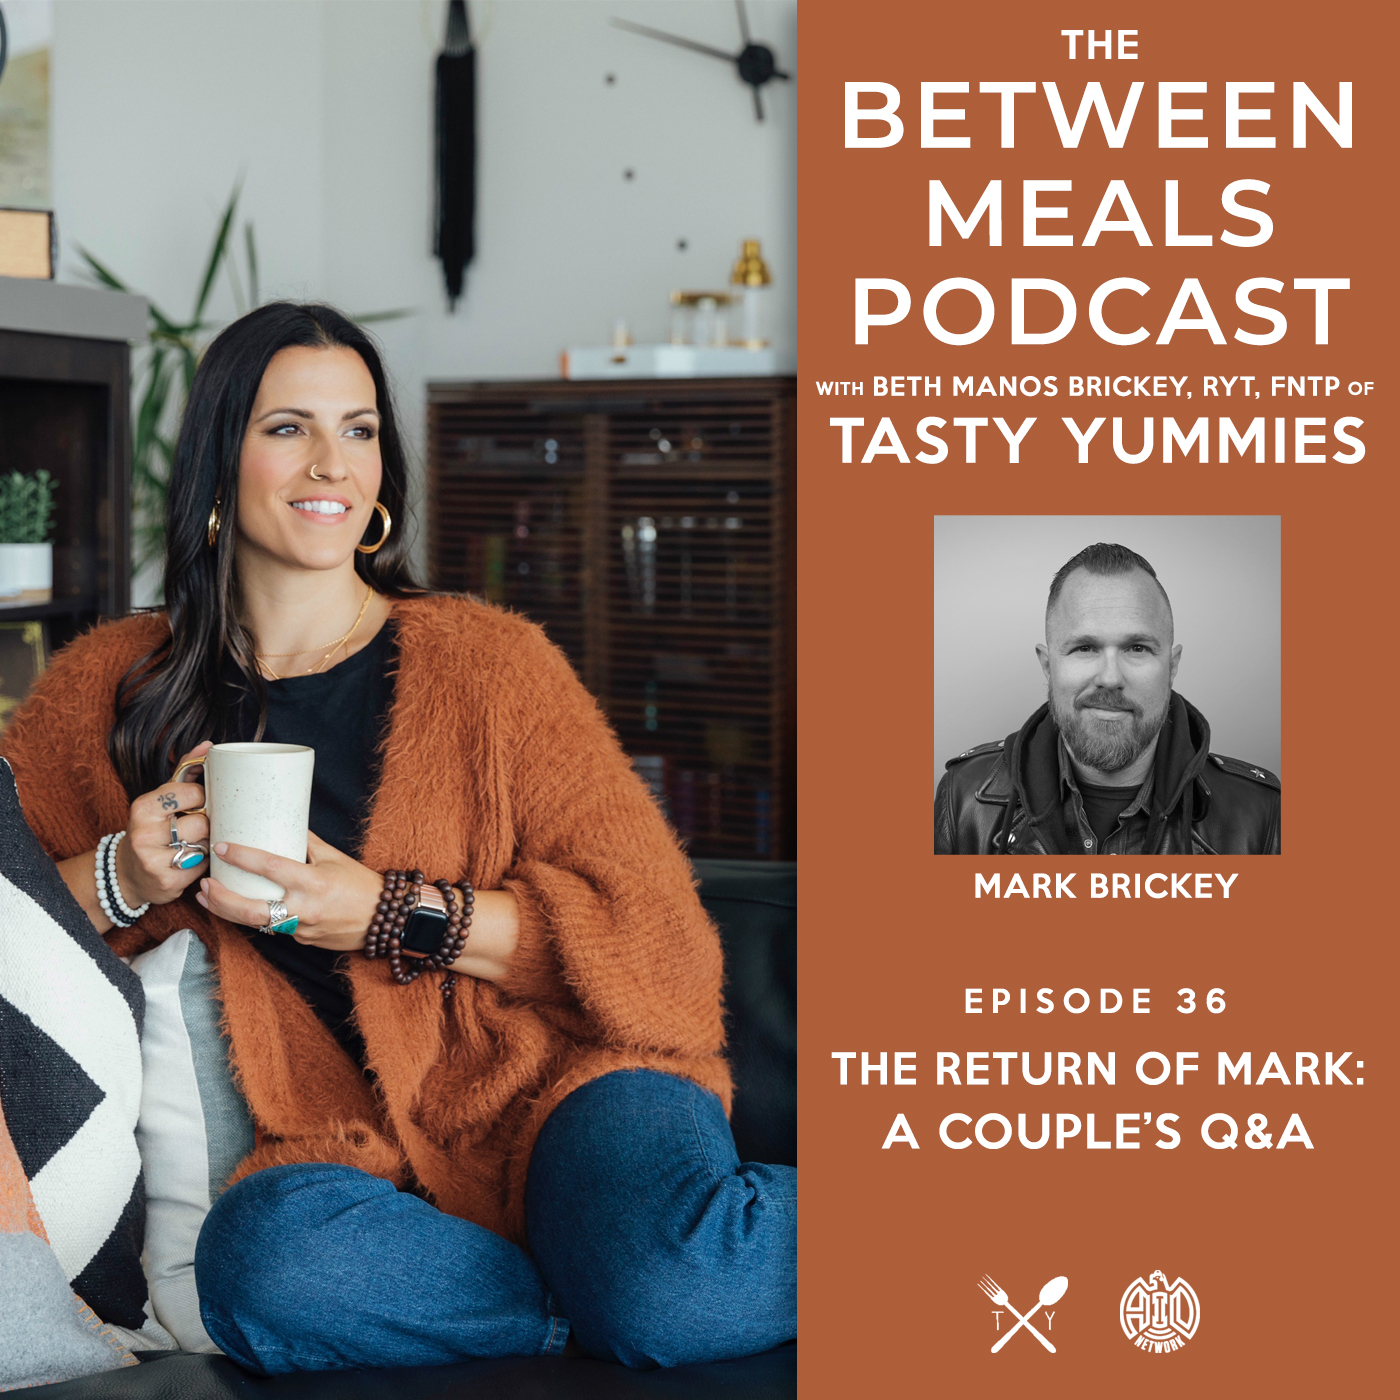 Between Meals Podcast. Episode 36: The Return of Mark. A Couple?s Q&A.